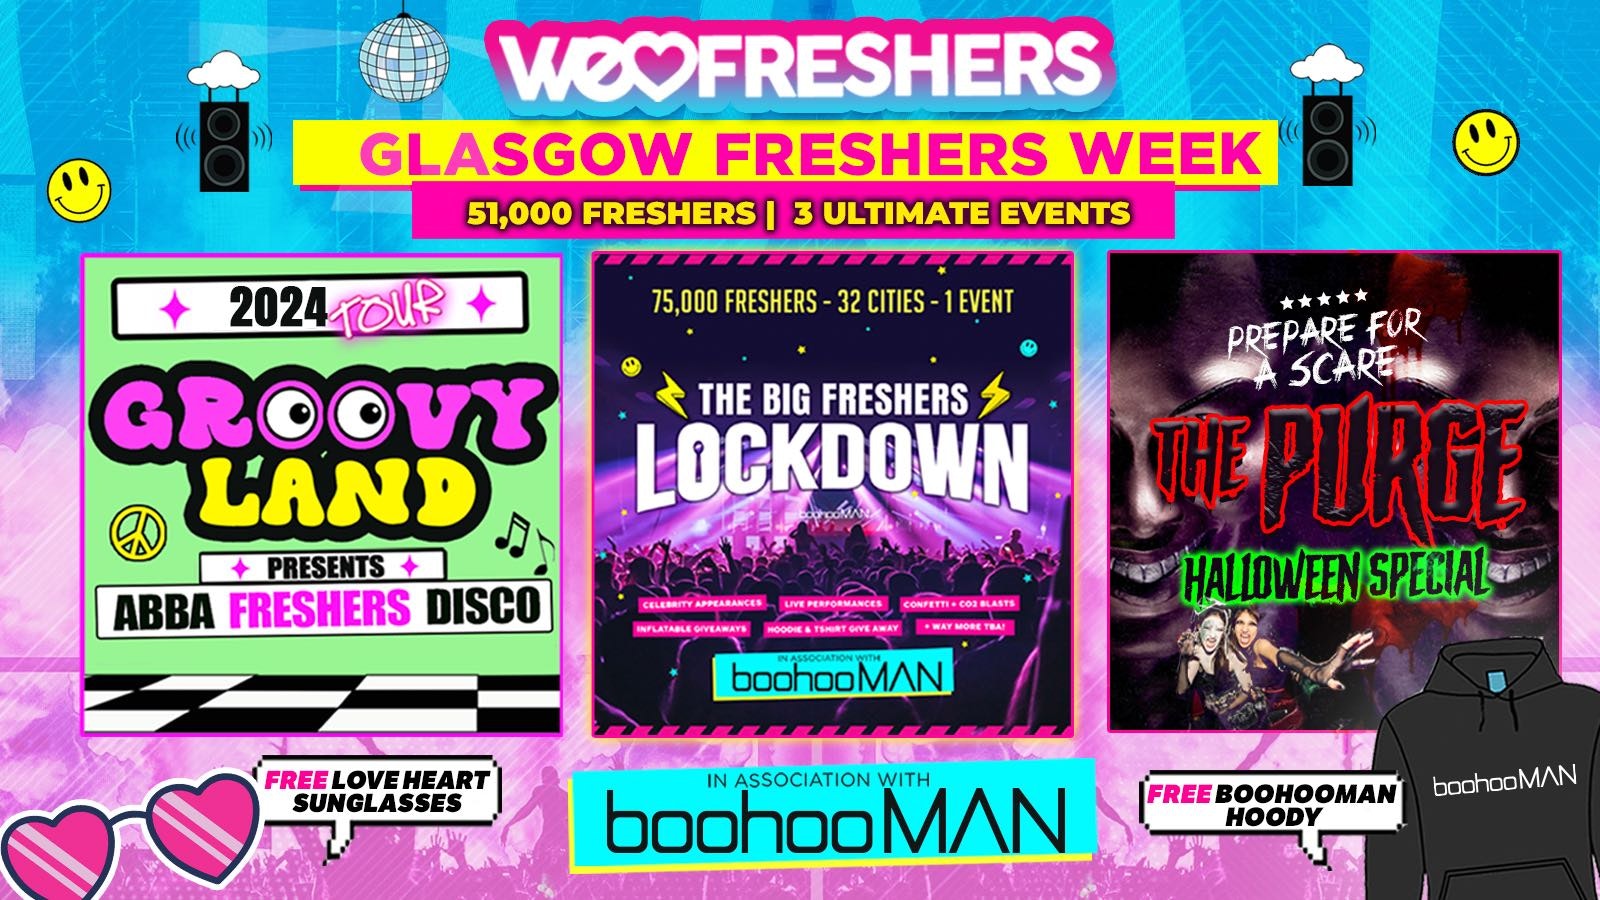 WE LOVE GLASGOW FRESHERS 2024 in association with boohooMAN ❗FREE BOOHOOMAN HOODIE TODAY ONLY❗